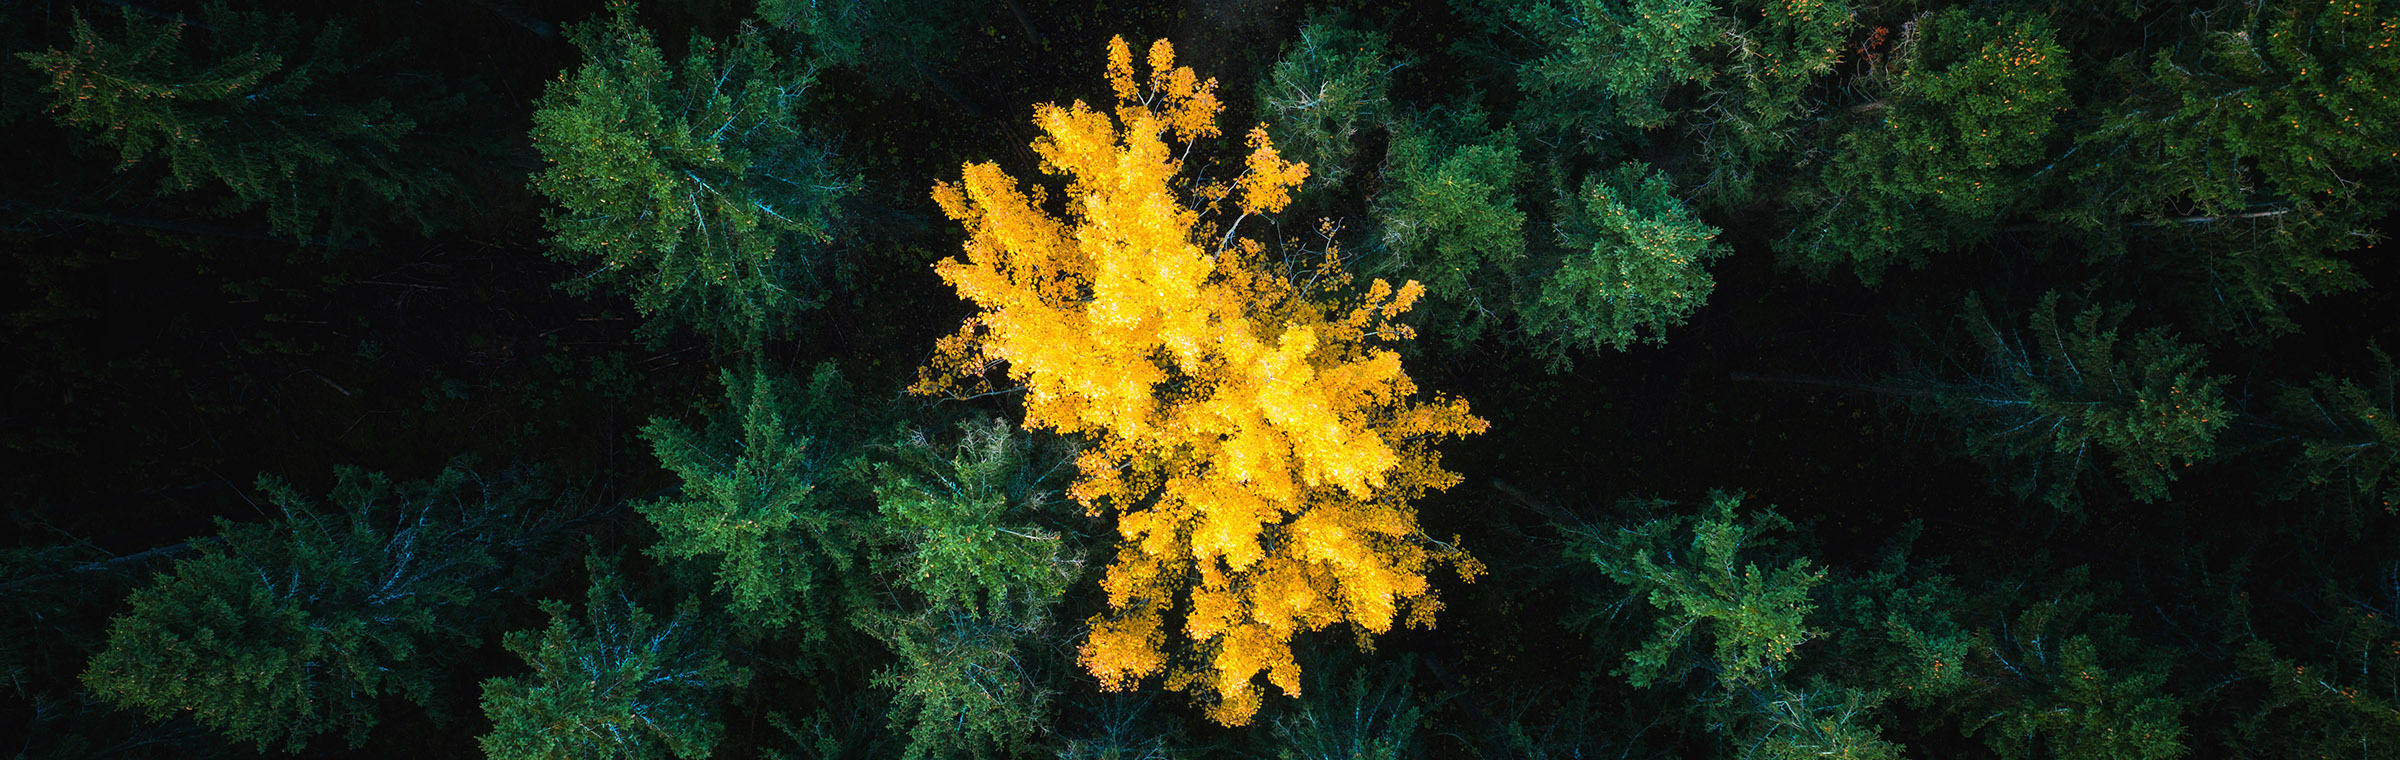 aerial view of a bright yellow tree in a forest of green pines